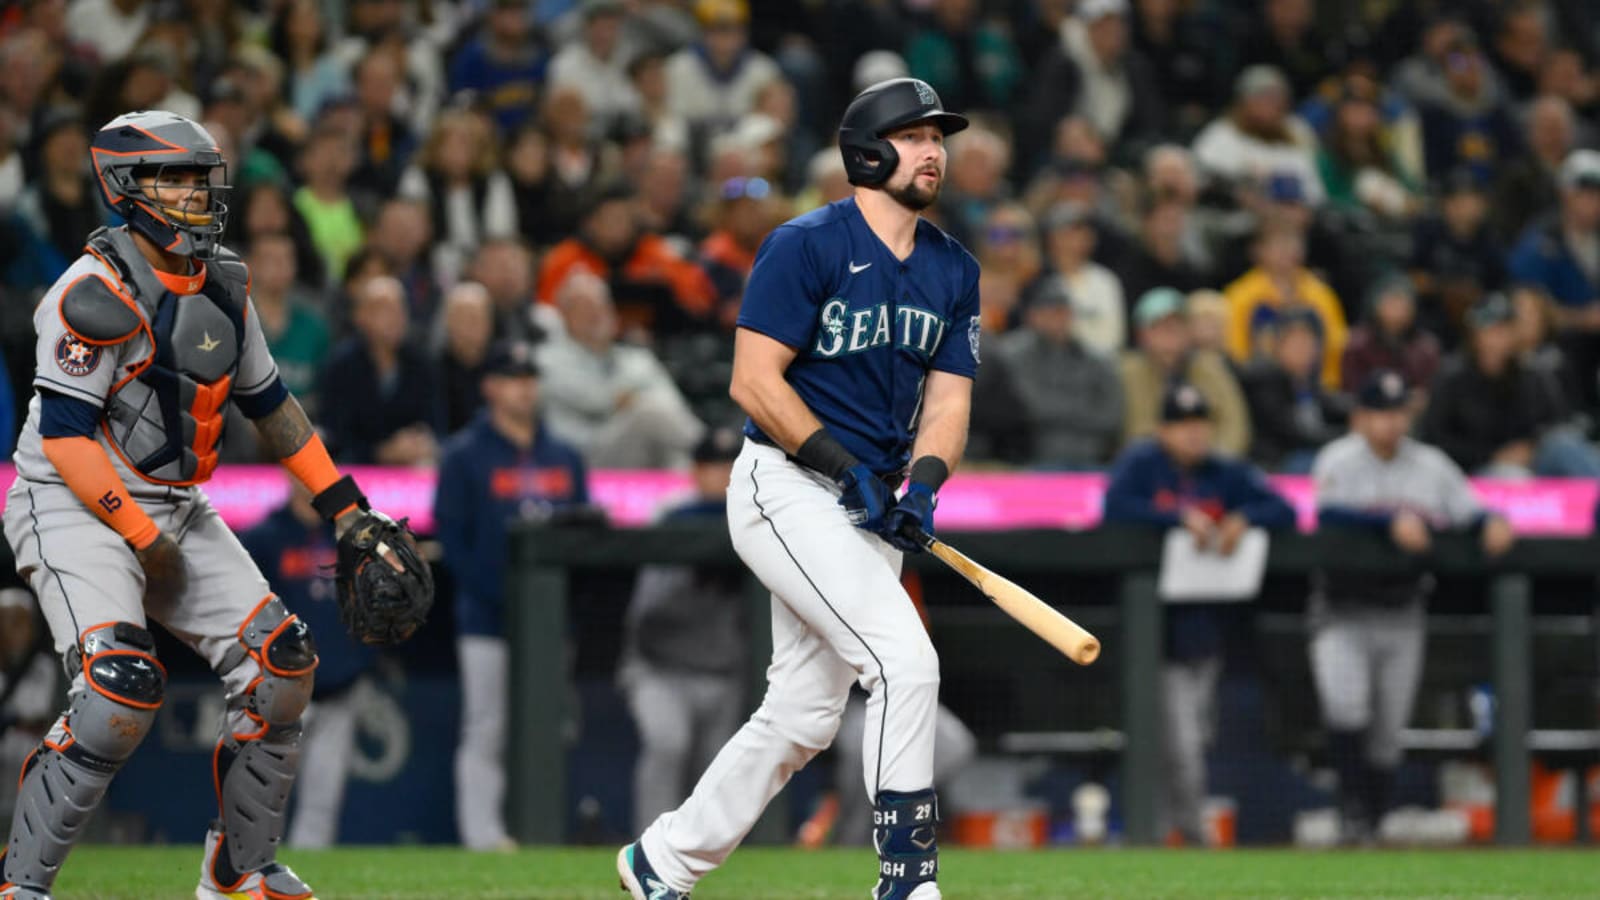 Seattle Mariners Catcher Cal Raleigh Joins Mike Piazza in Baseball History Books